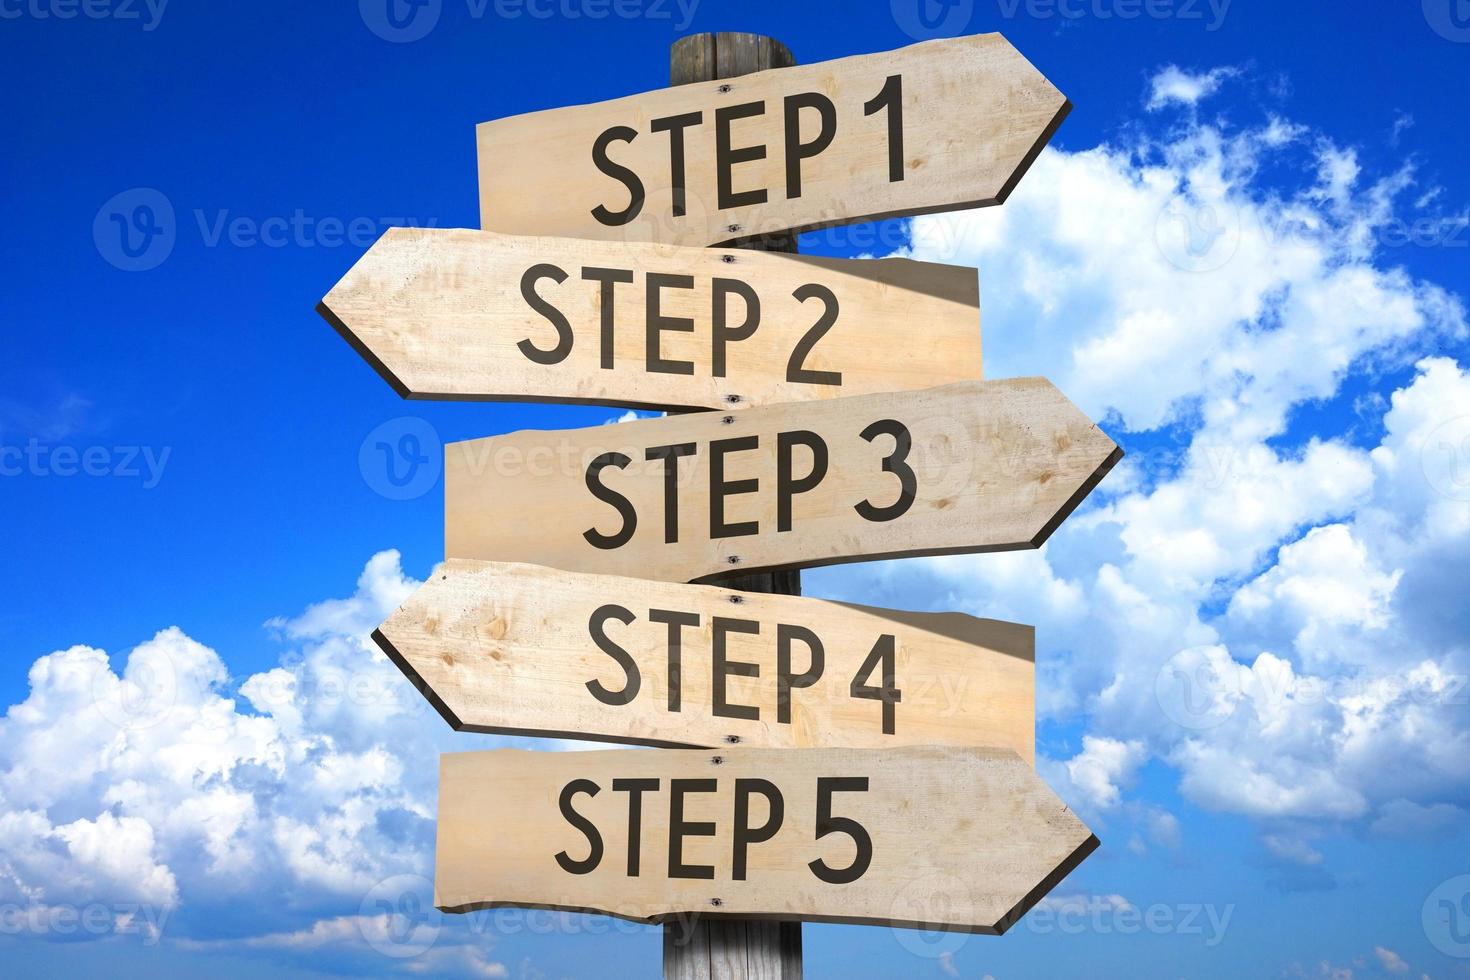 Steps 1, 2, 3, 4, 5 - Wooden Signpost with Five Arrows, Sky with Clouds in Background photo